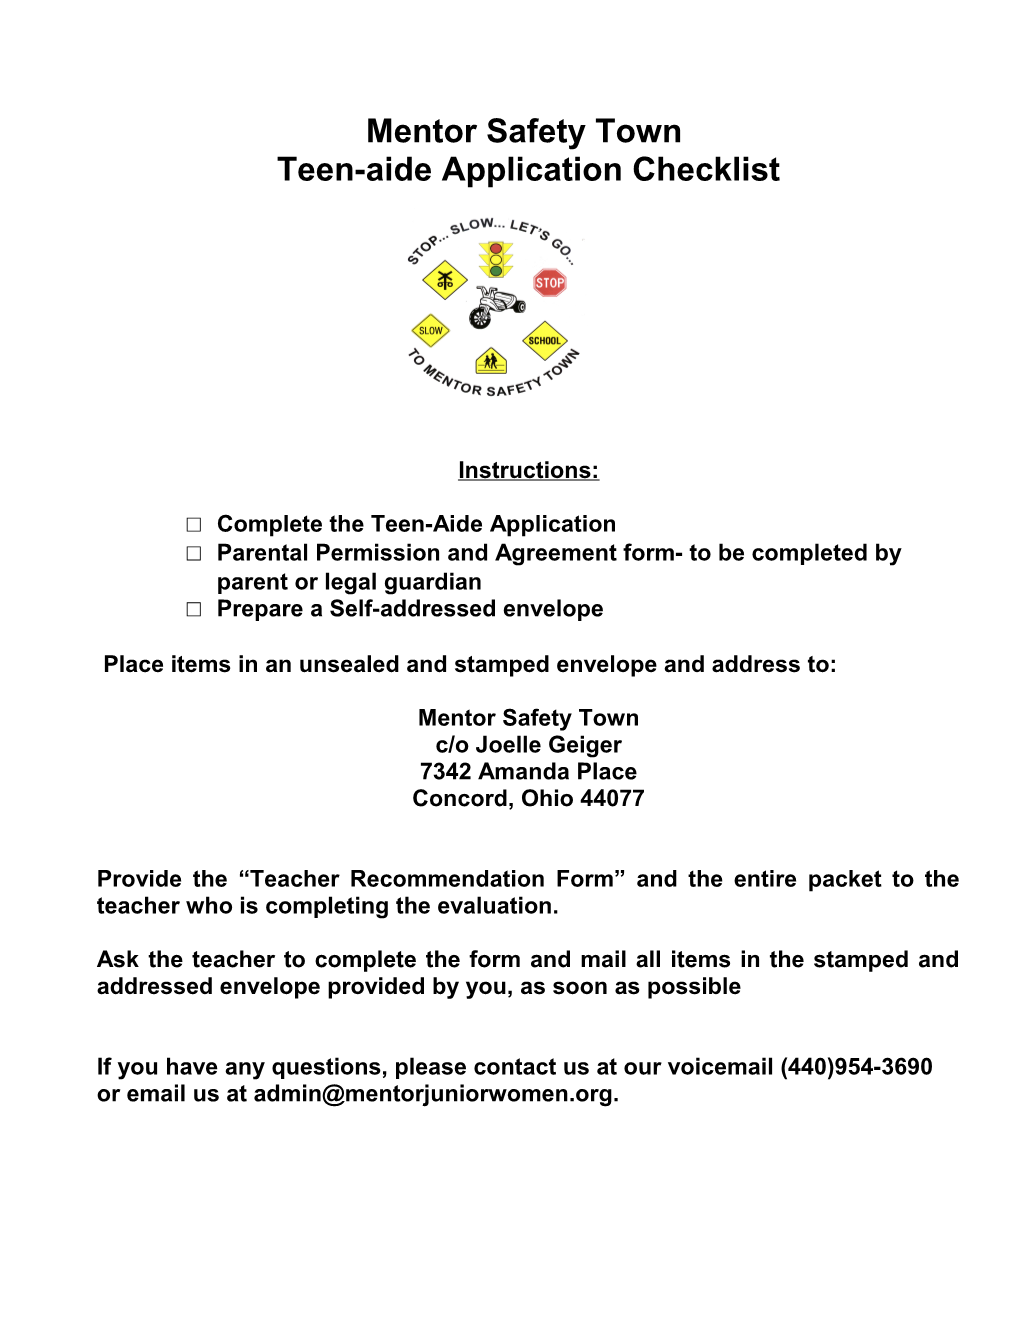 Mentor Safety Town Teen-Aide Application Checklist